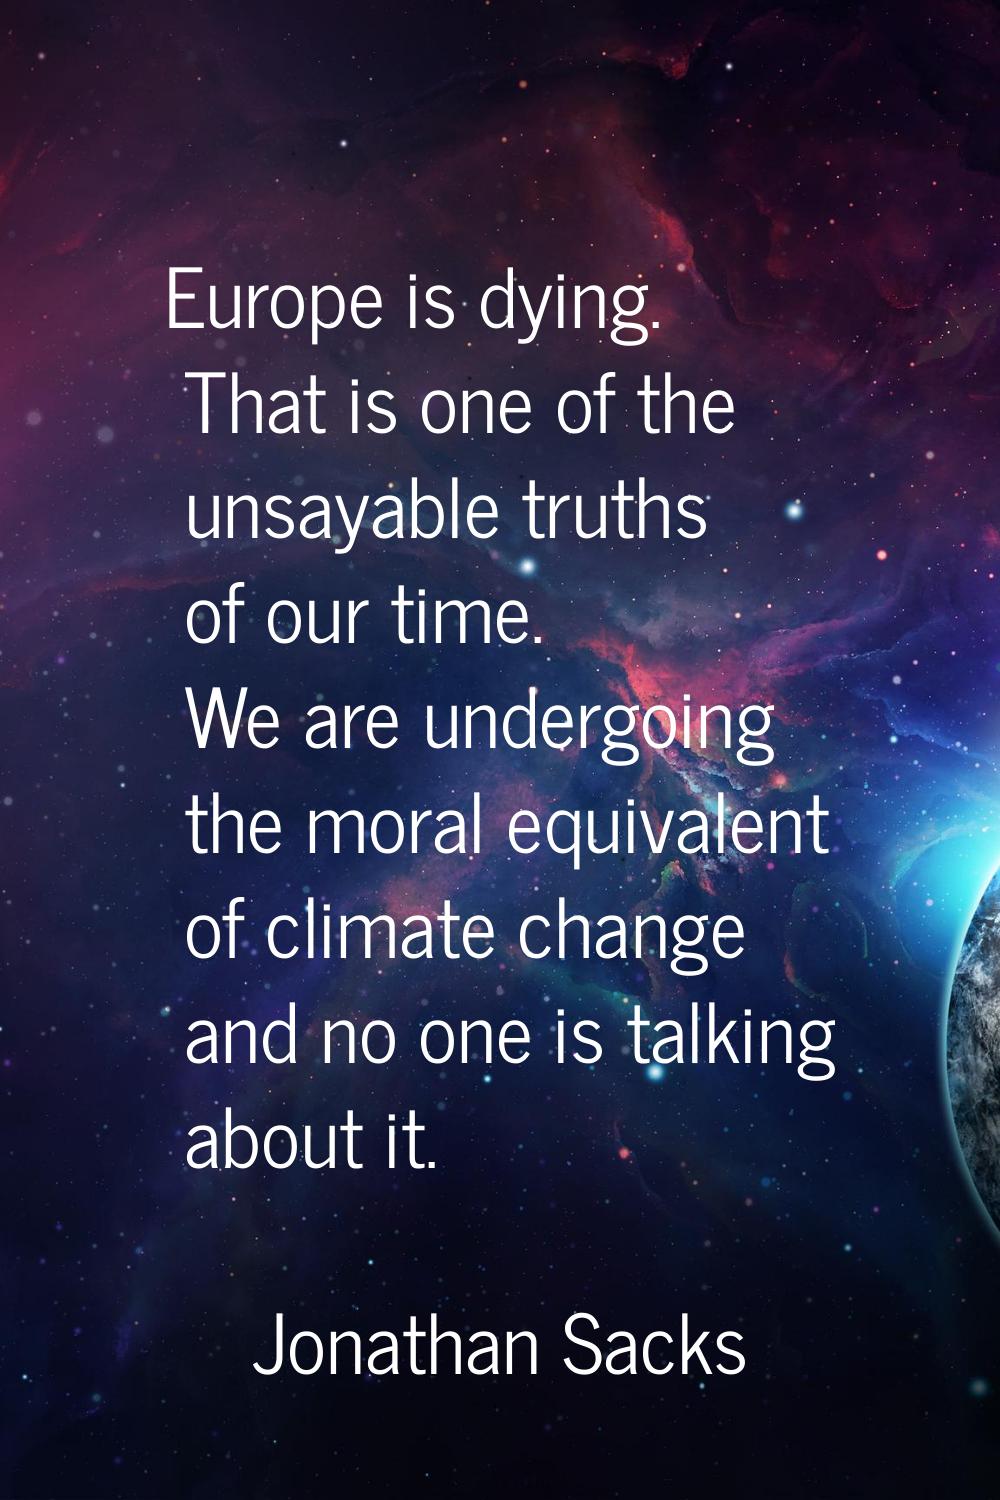 Europe is dying. That is one of the unsayable truths of our time. We are undergoing the moral equiv